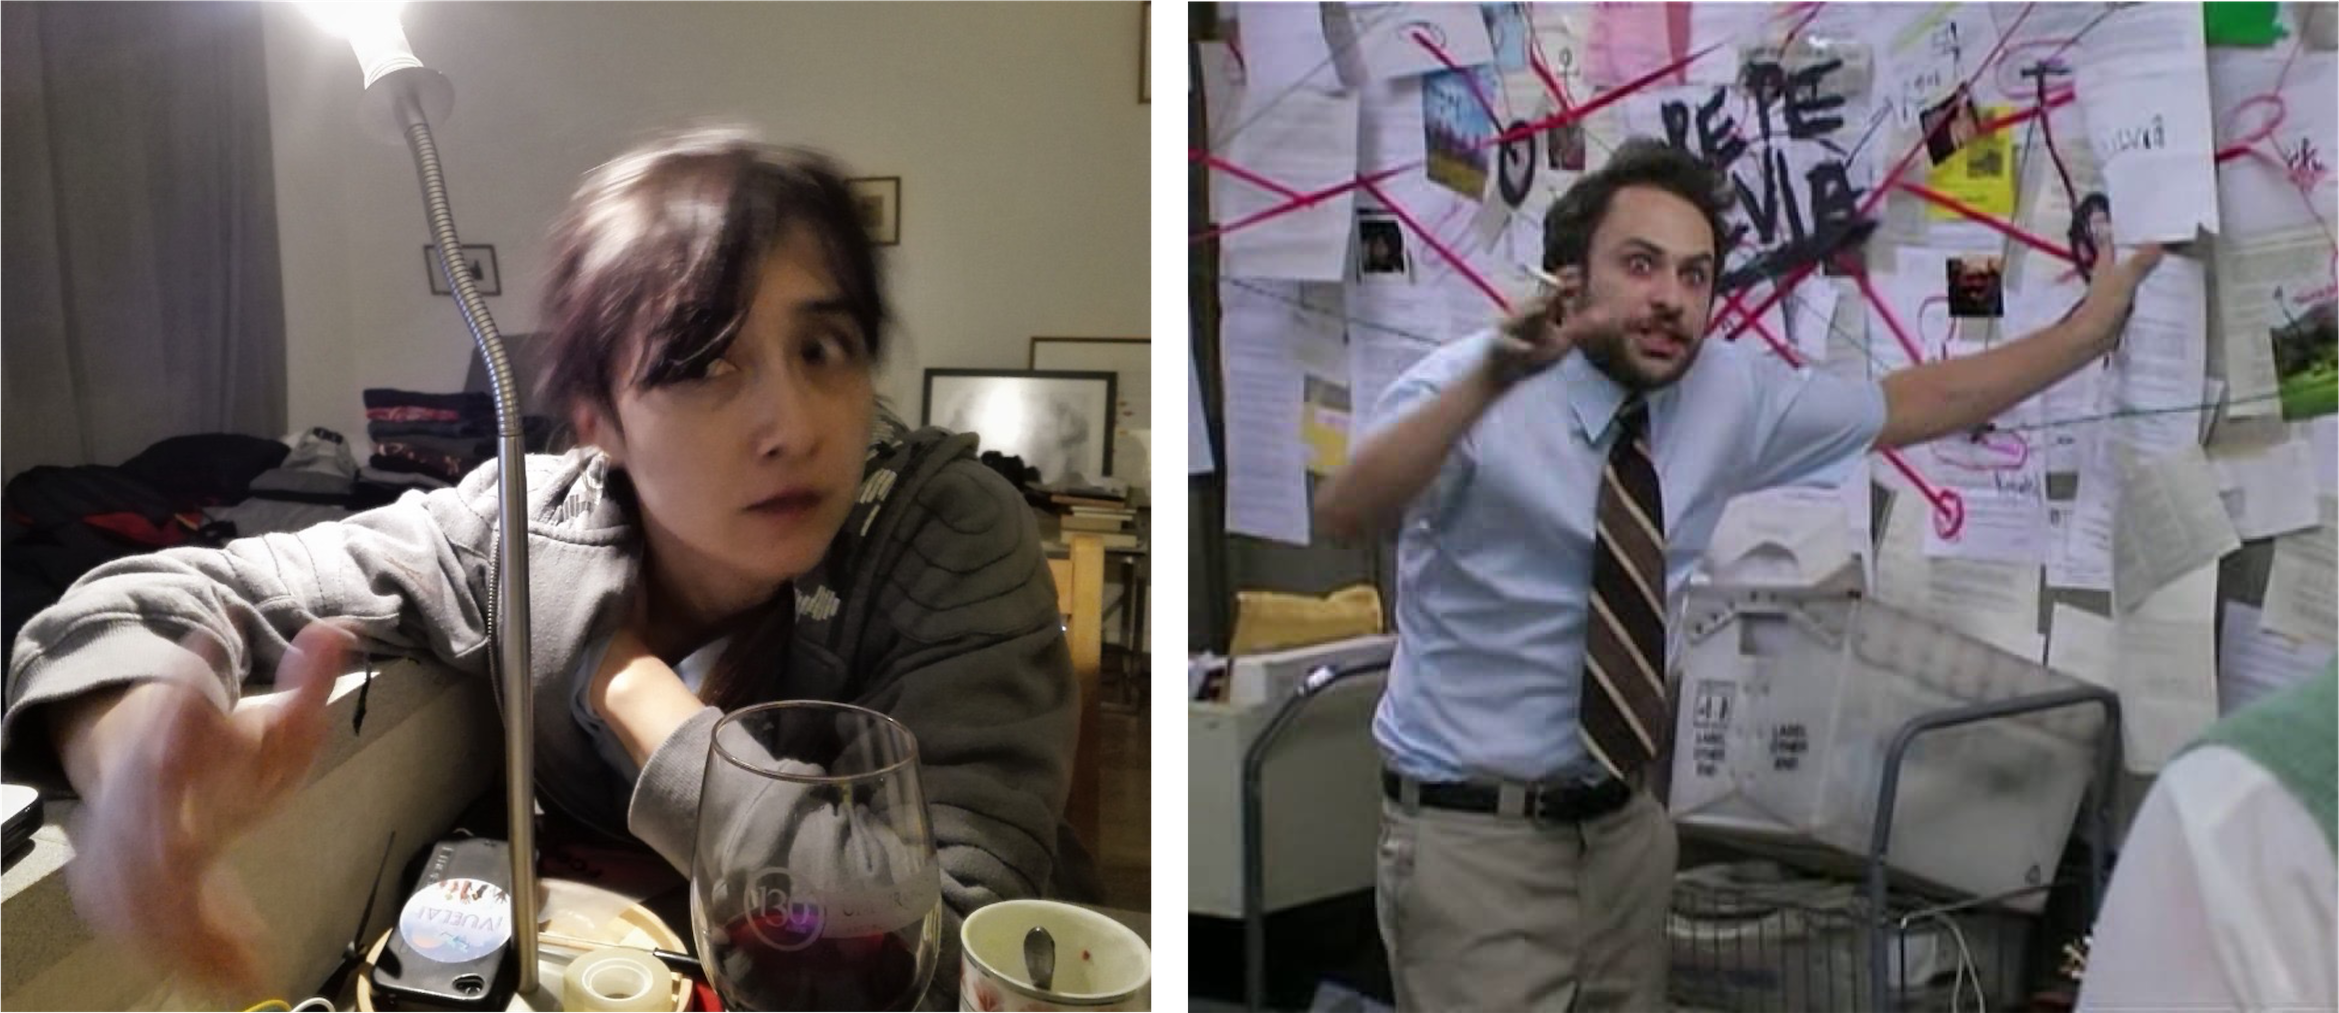 Paz is connecting dots in her mind, mimicking a meme reference to one of the most famous scenes of It's Always Sunny In Philadelphia in which the character Charlie goes on a conspiratorial rant about how he believes a person named 'Pepe Silvia' does not exist.